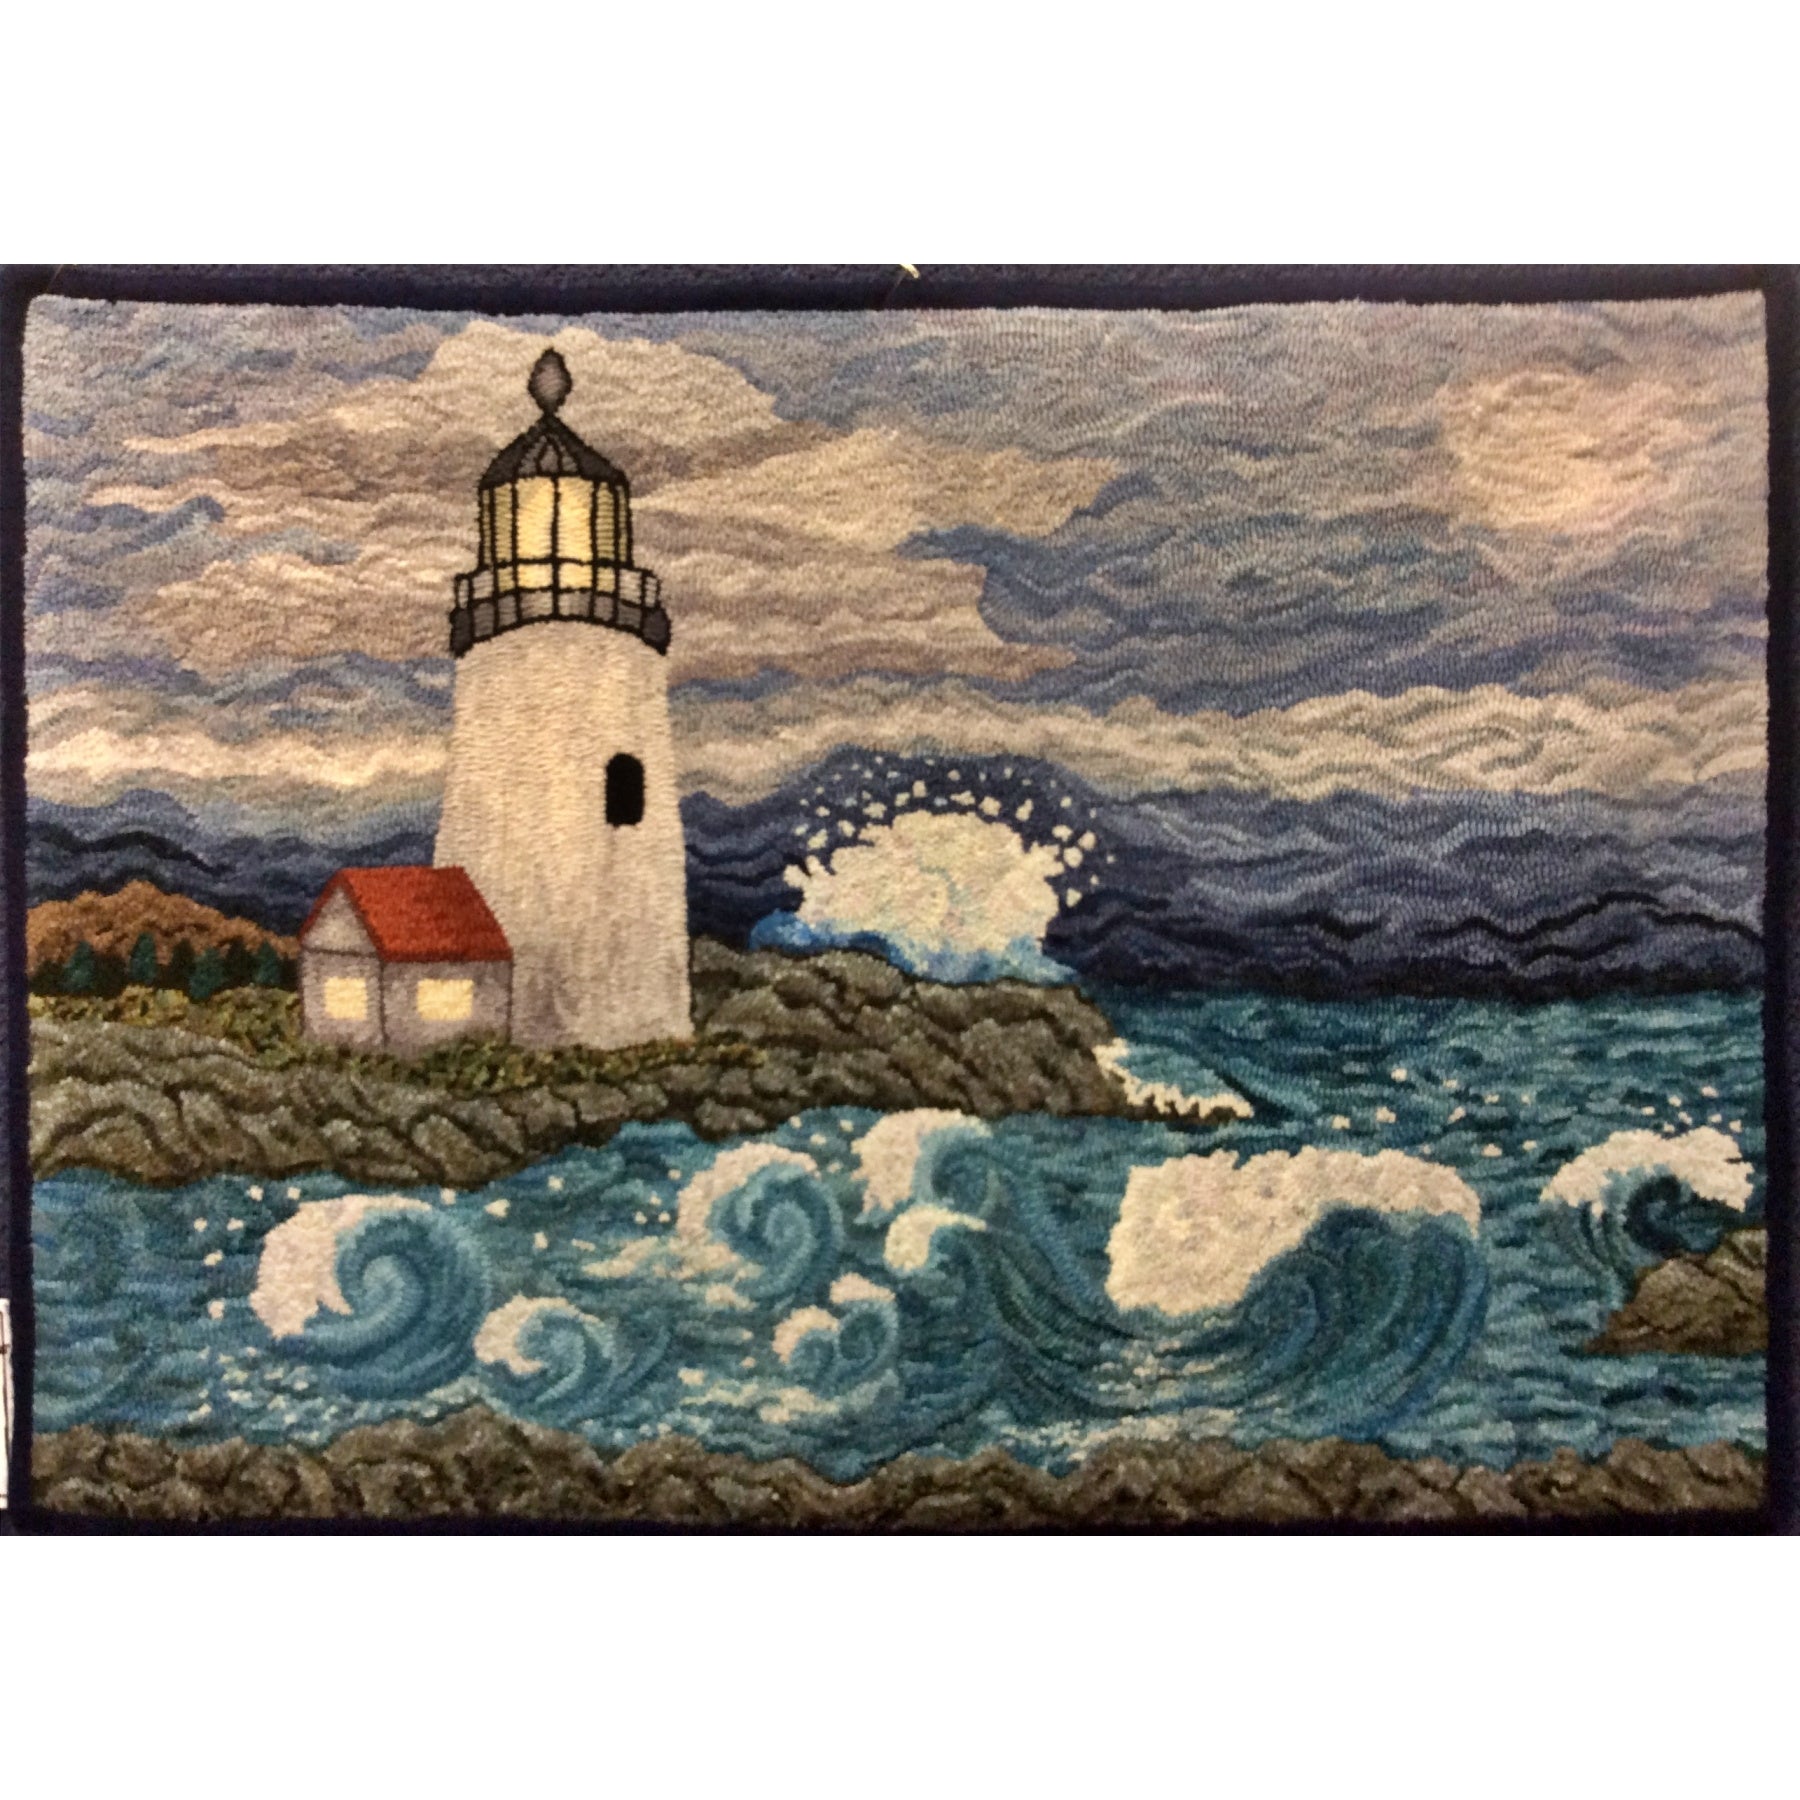 Pemaquid Light House - Small, rug hooked by Barb Powell